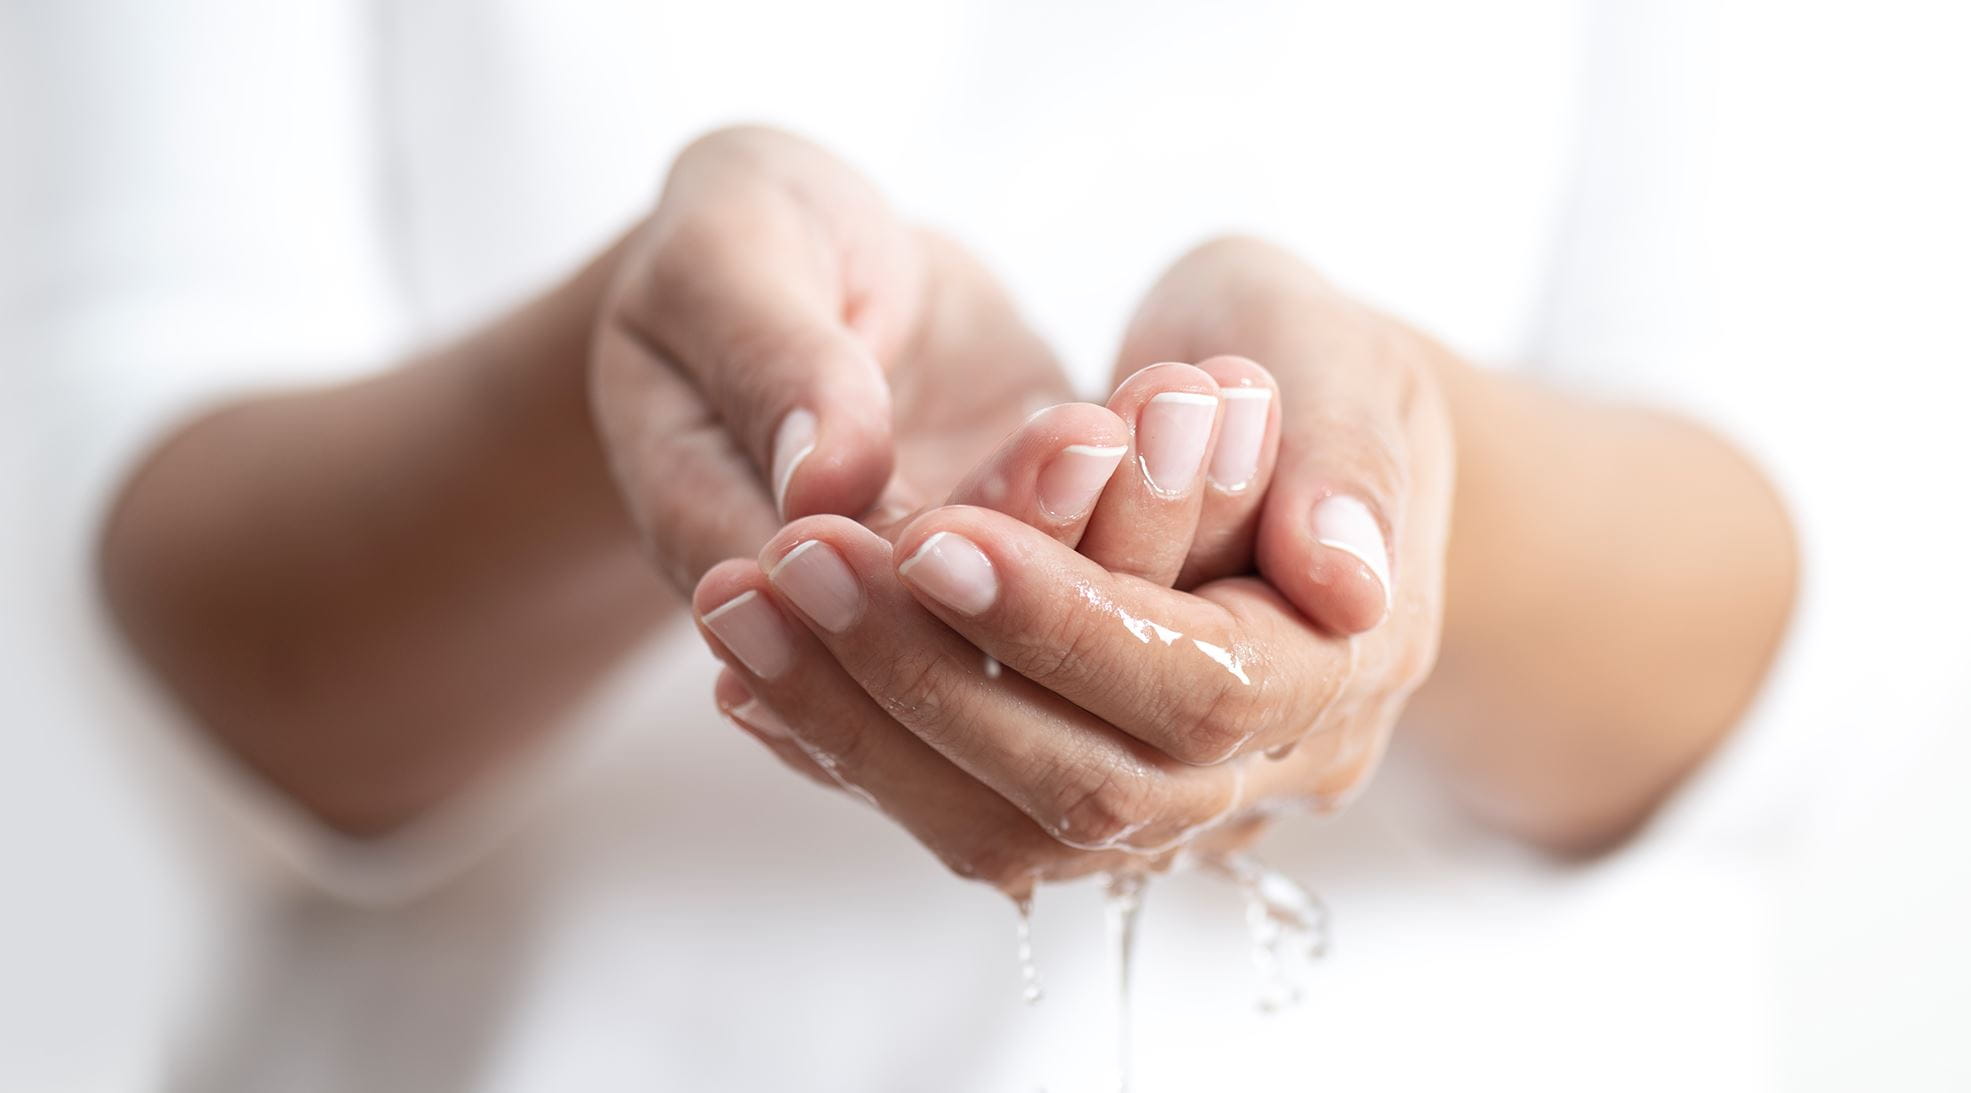 5 Important Tips for Healthy Beautiful Hands and Nails!